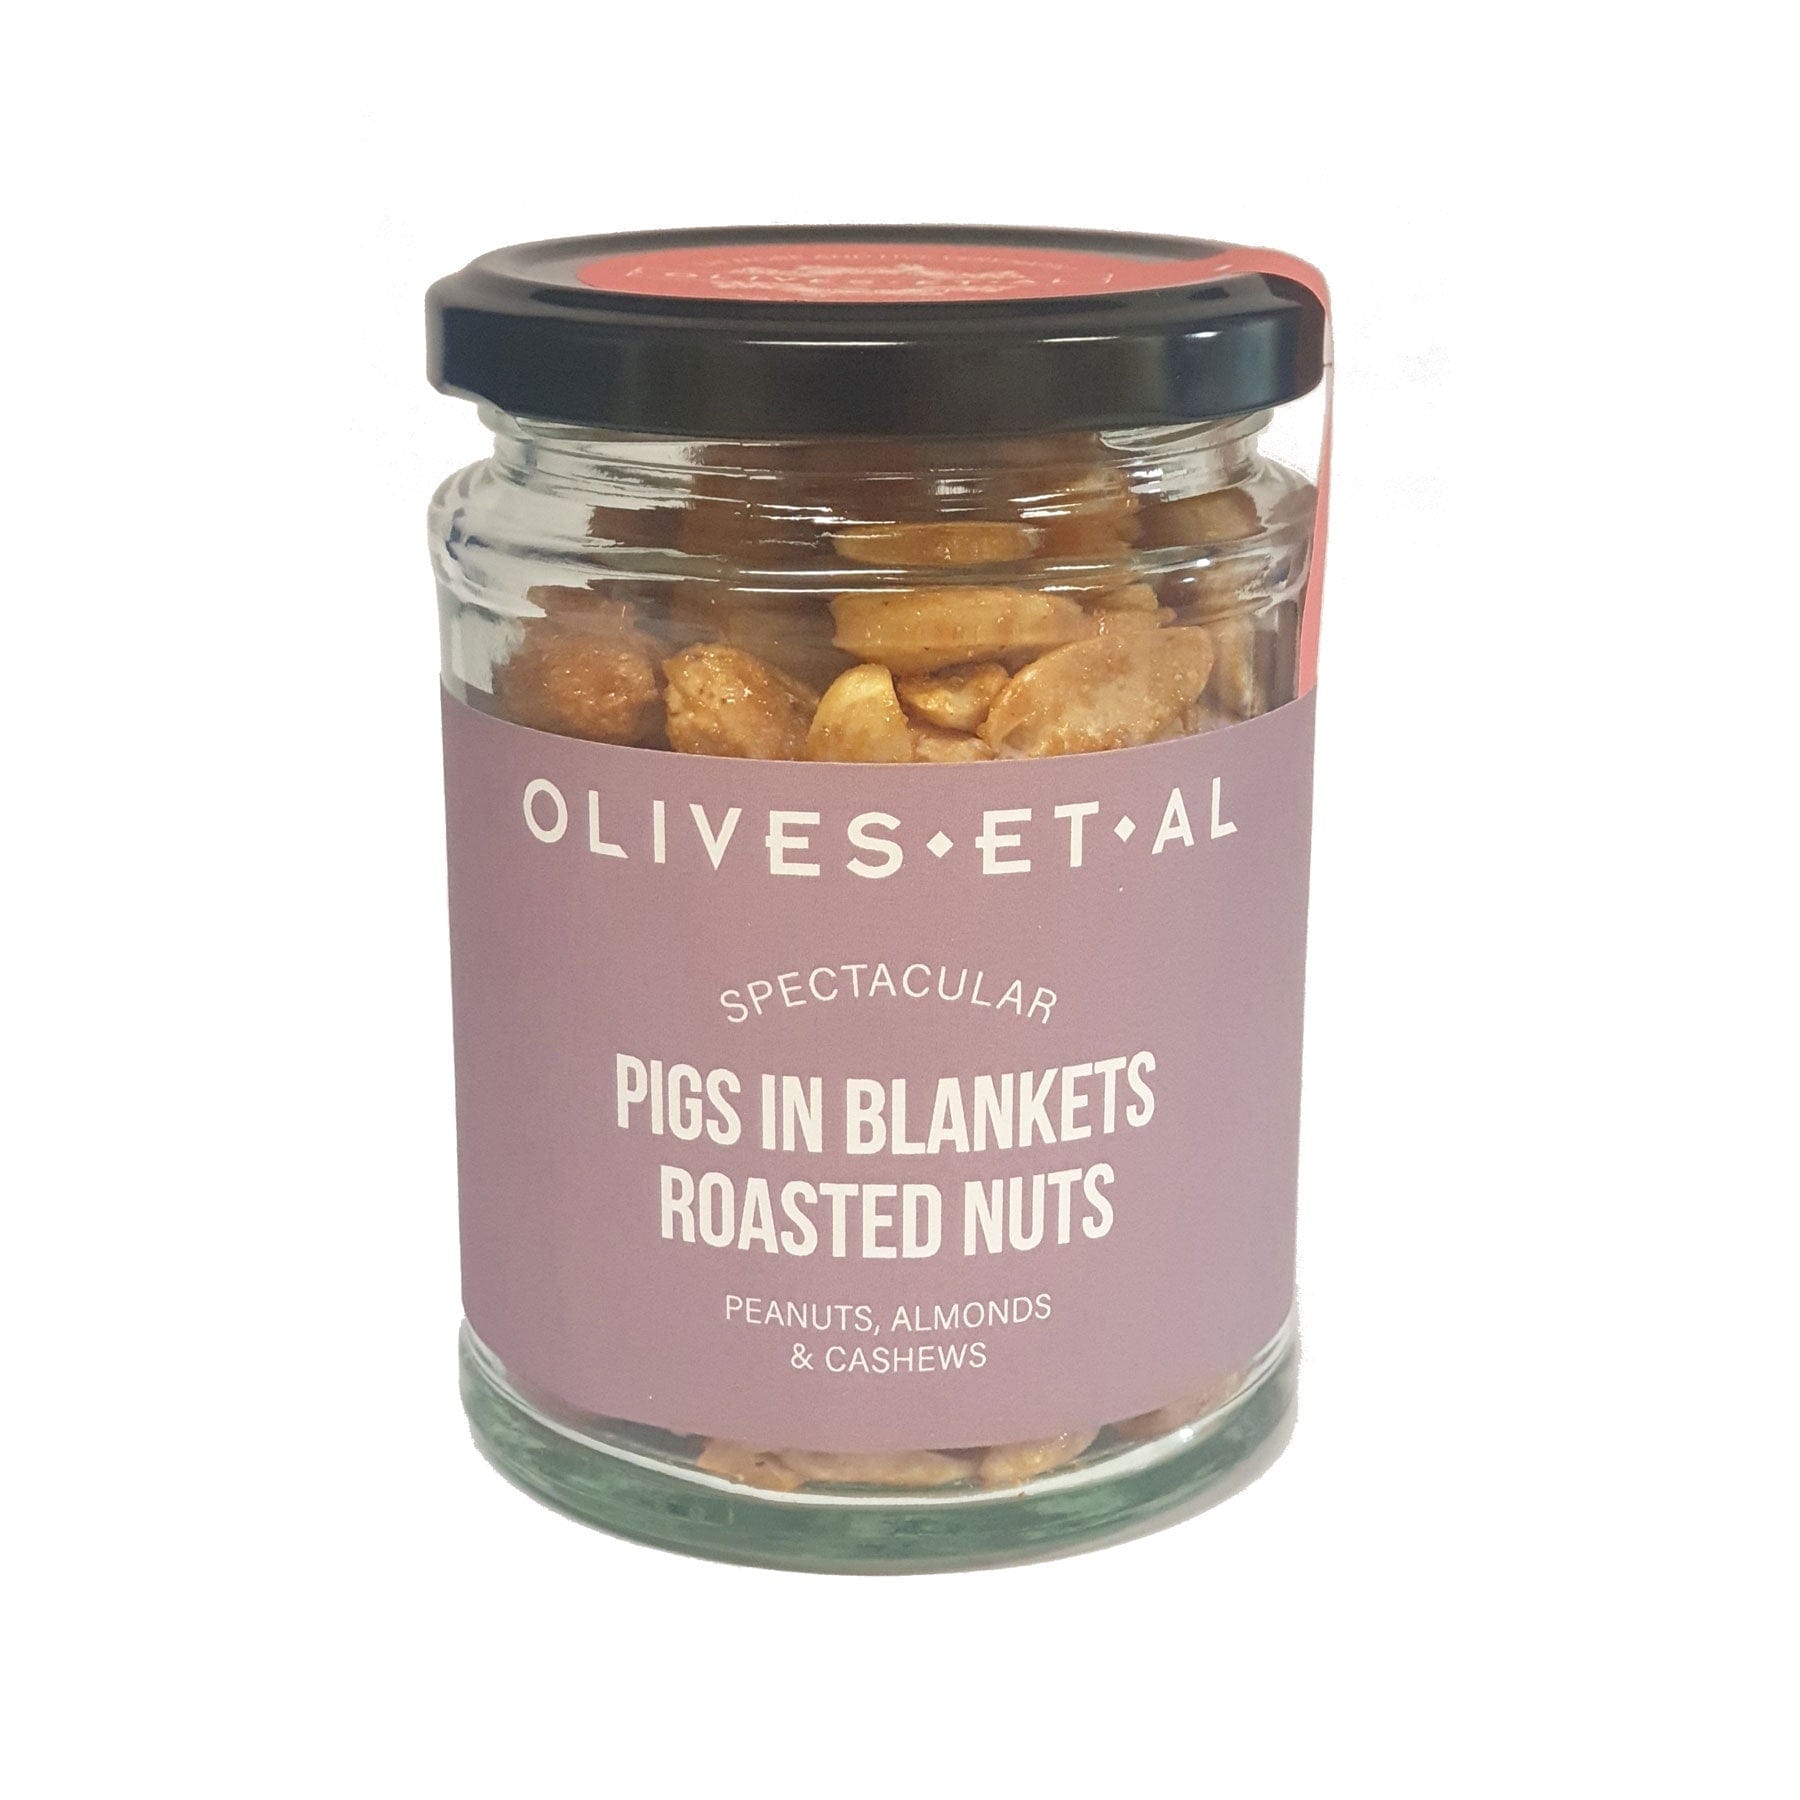 Pigs in blankets roasted nuts 150g